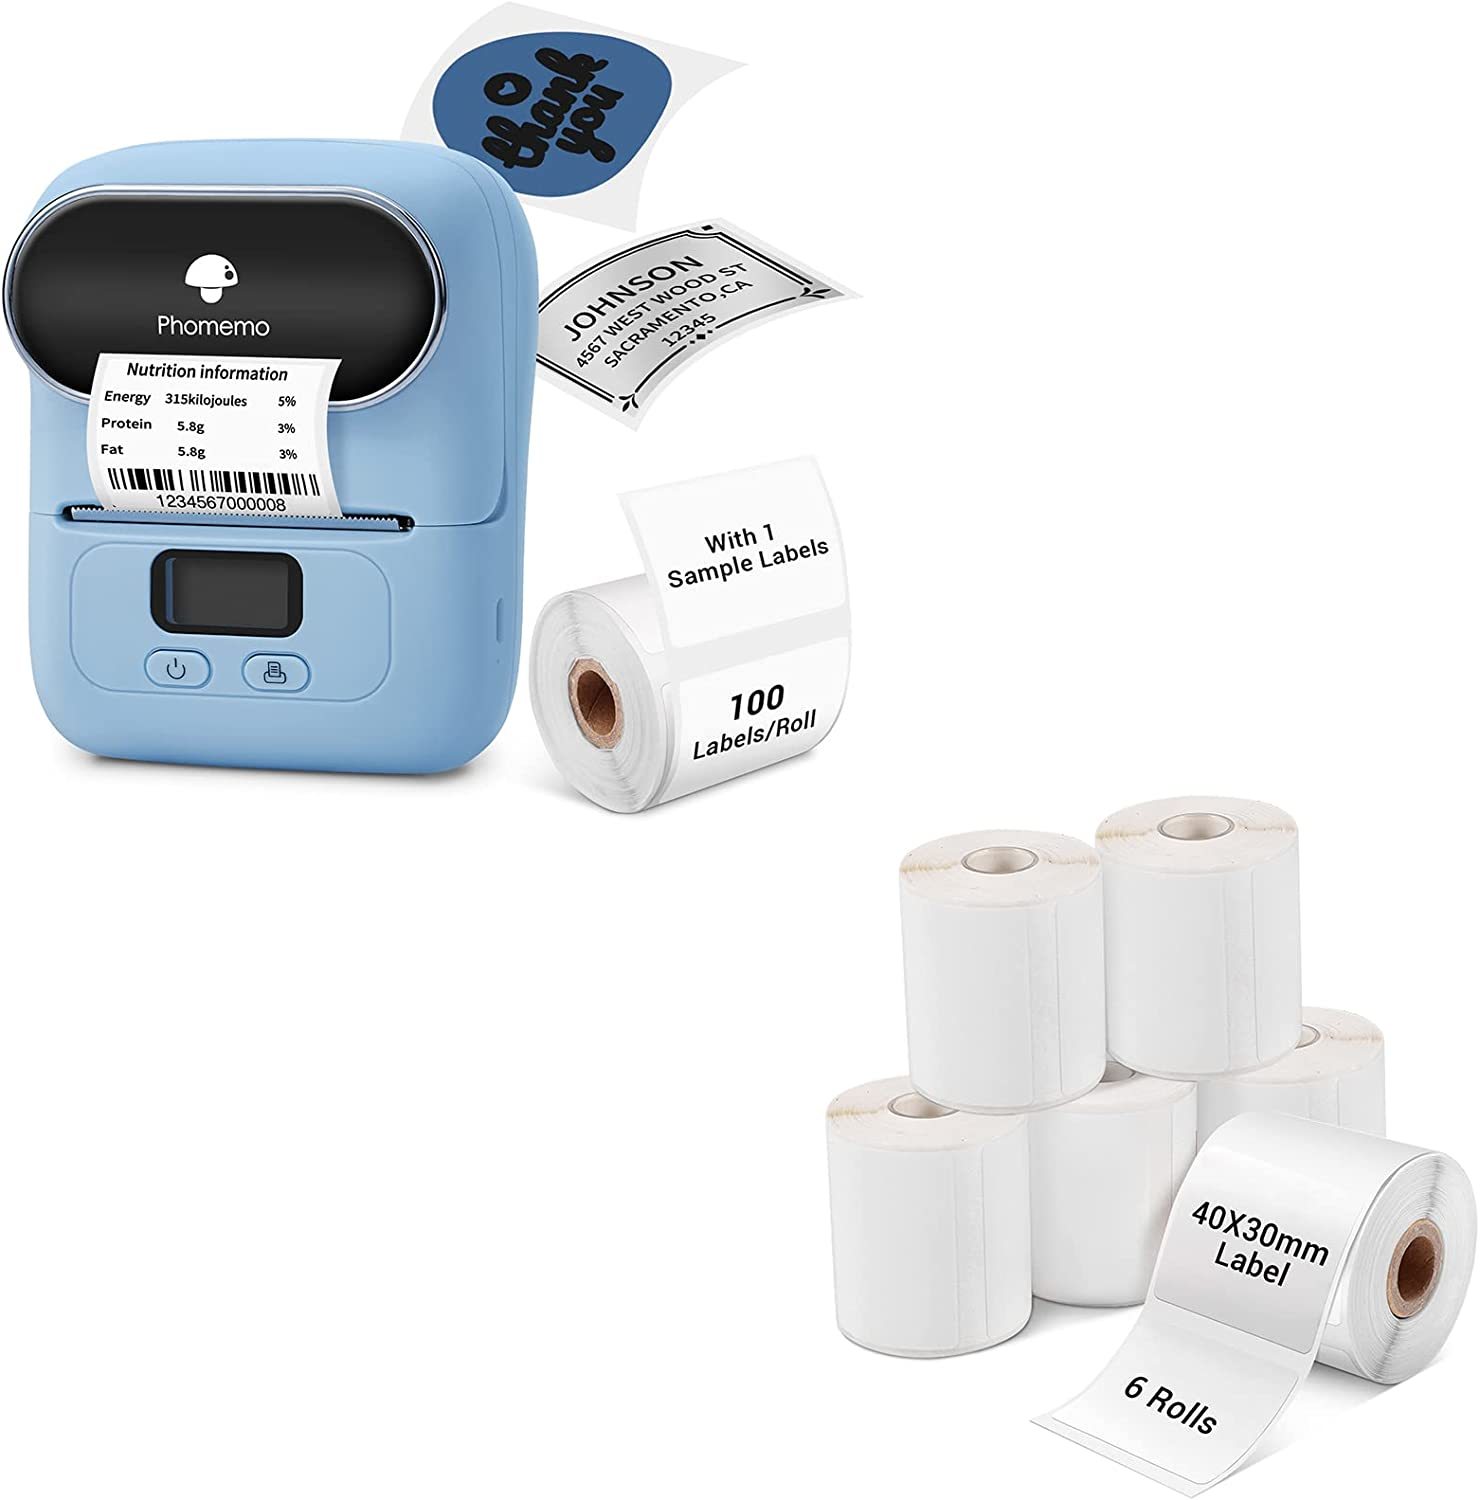 Primary image for Phomemo Barcode Label Printer- M110 Label Maker Portable Bluetooth Label, Blue.